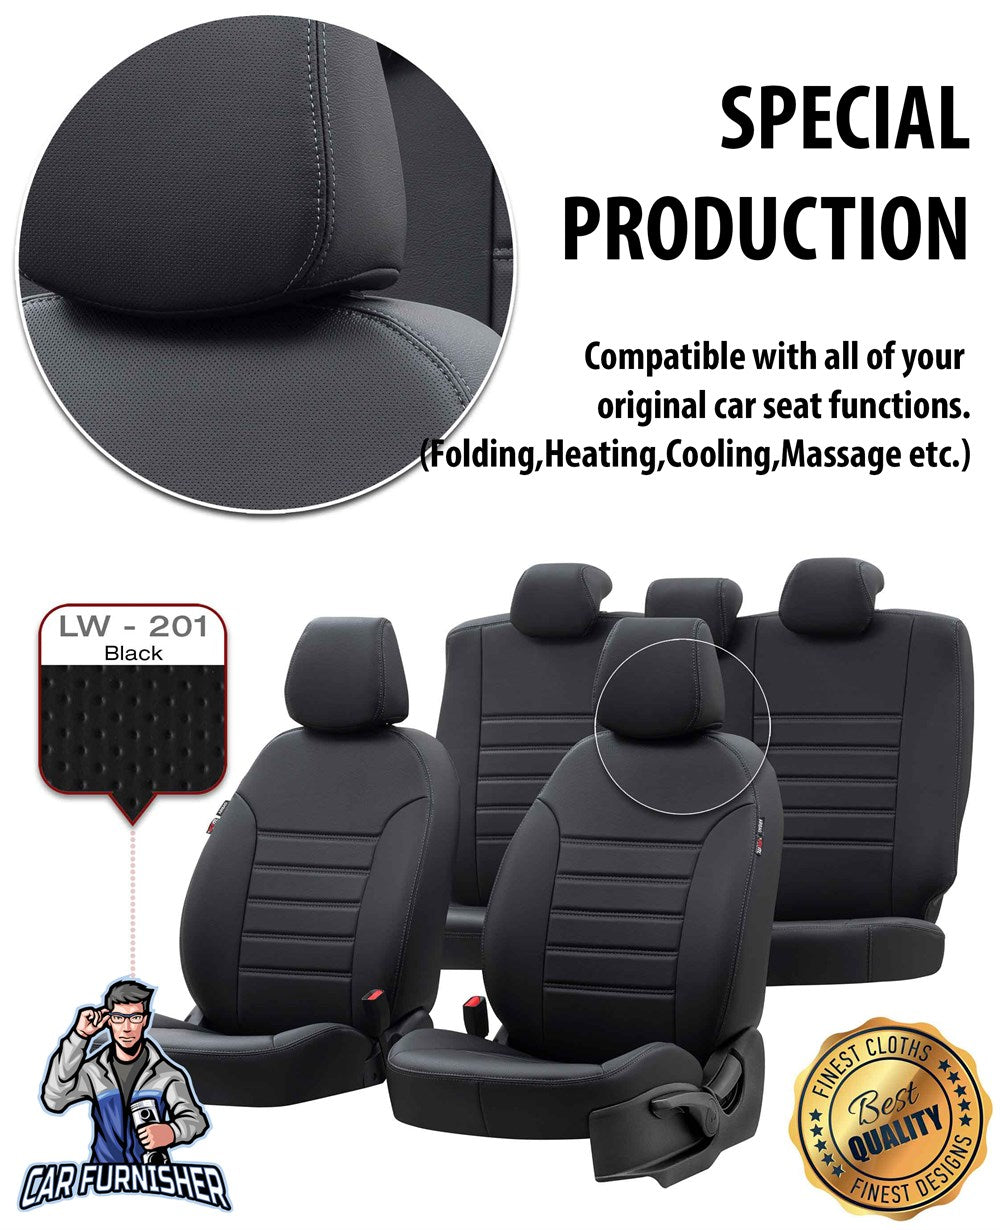 Dacia Dokker Seat Covers Istanbul Leather Design Smoked Black Leather